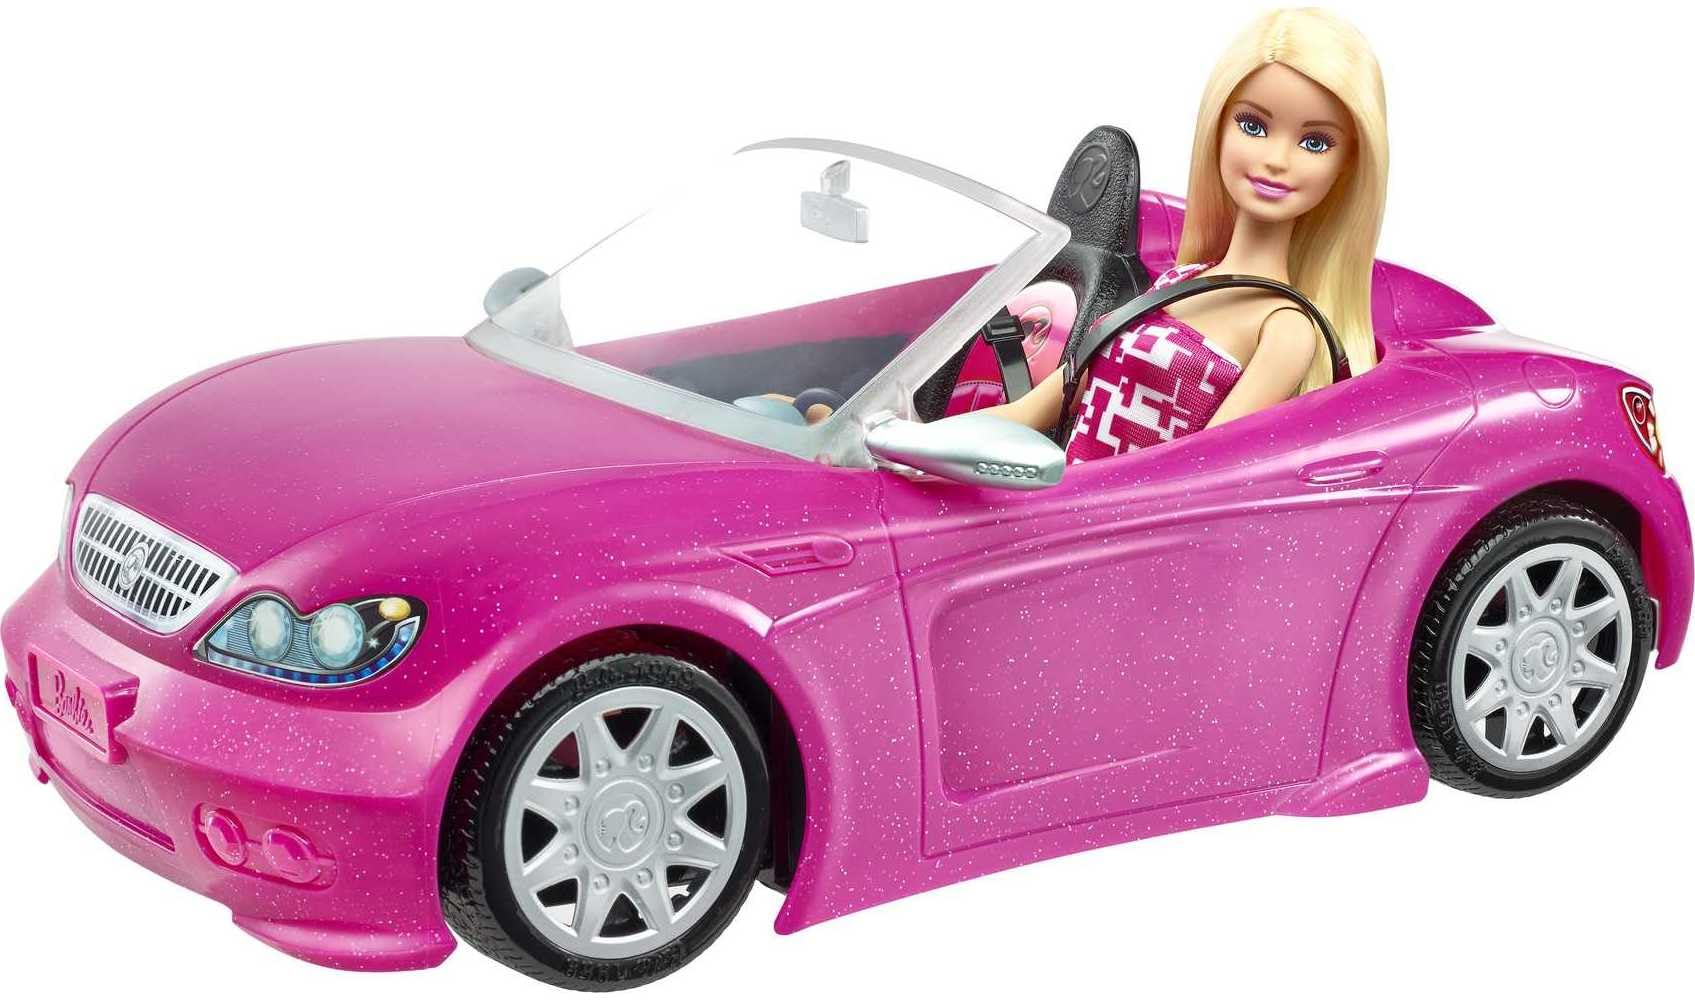 Barbie Car and Doll Set, Sparkly Pink 2-Seater Convertible with Glam Details, Doll in Sundress and Sunglasses (Amazon Exclusive)